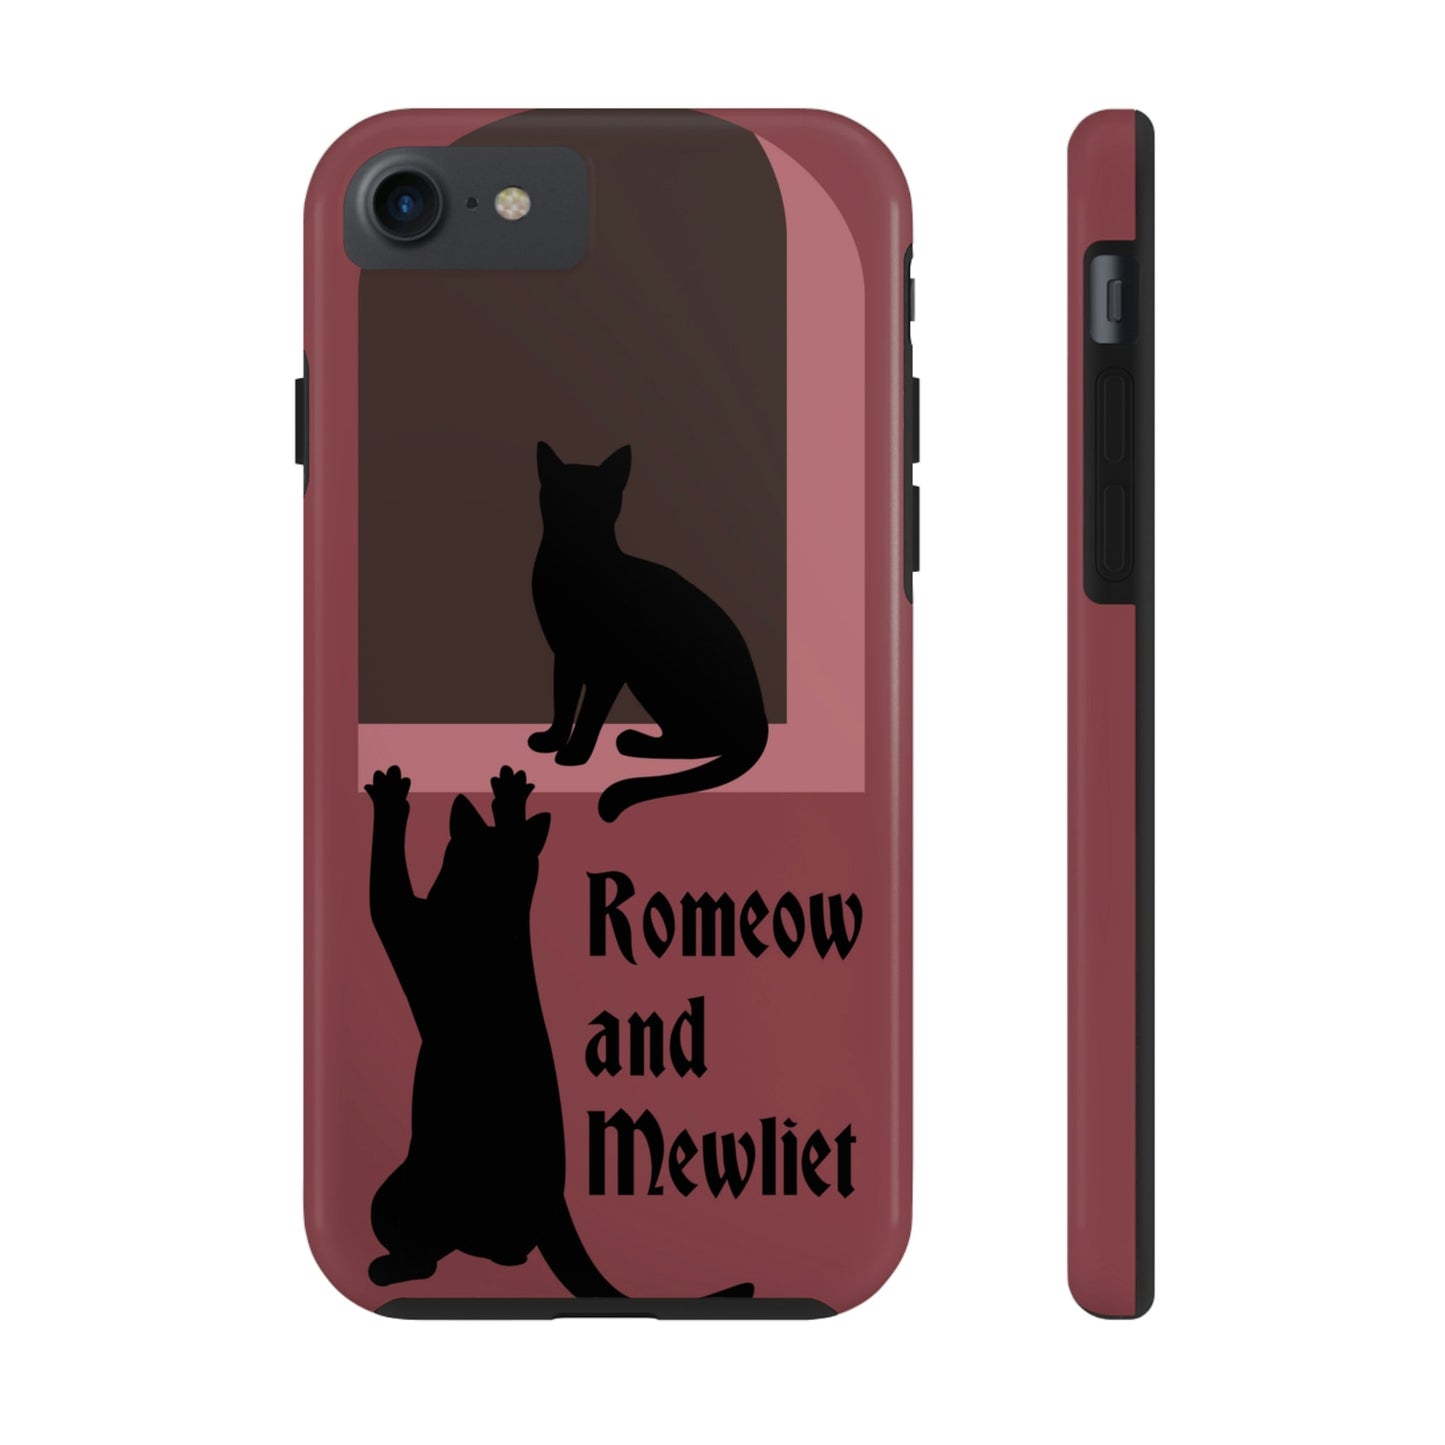 Romeow and Mewliet. William Shakespeare Romeo And Juliet Black Cat Lovers Burgundy Tough Phone Cases Case-Mate Ichaku [Perfect Gifts Selection]